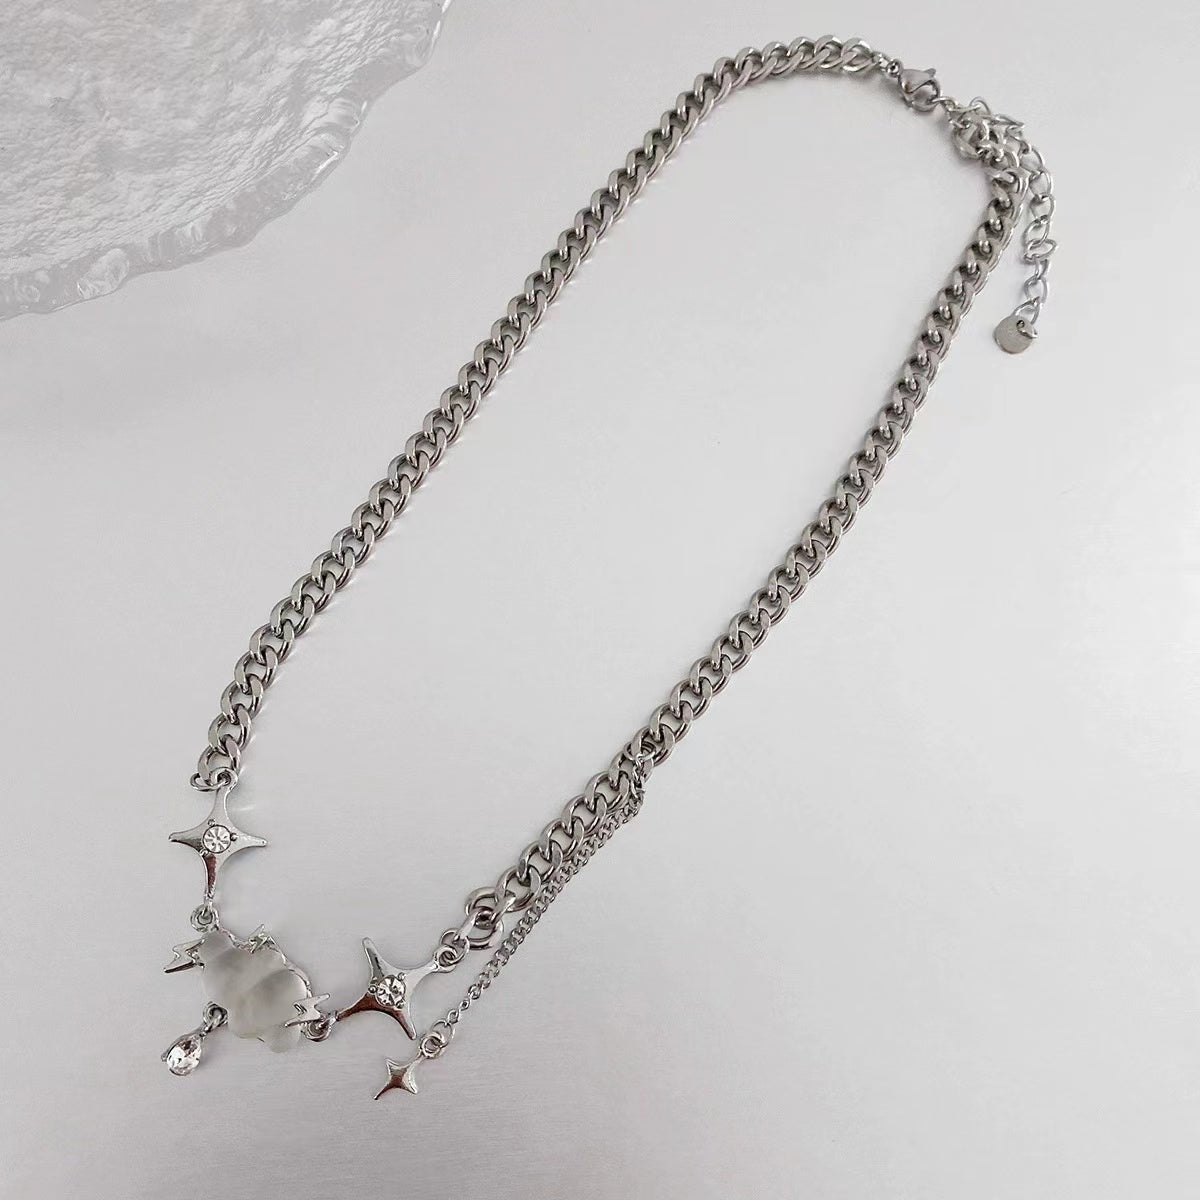 Frosted clouds starburst necklace simple niche design sense clavicle chain